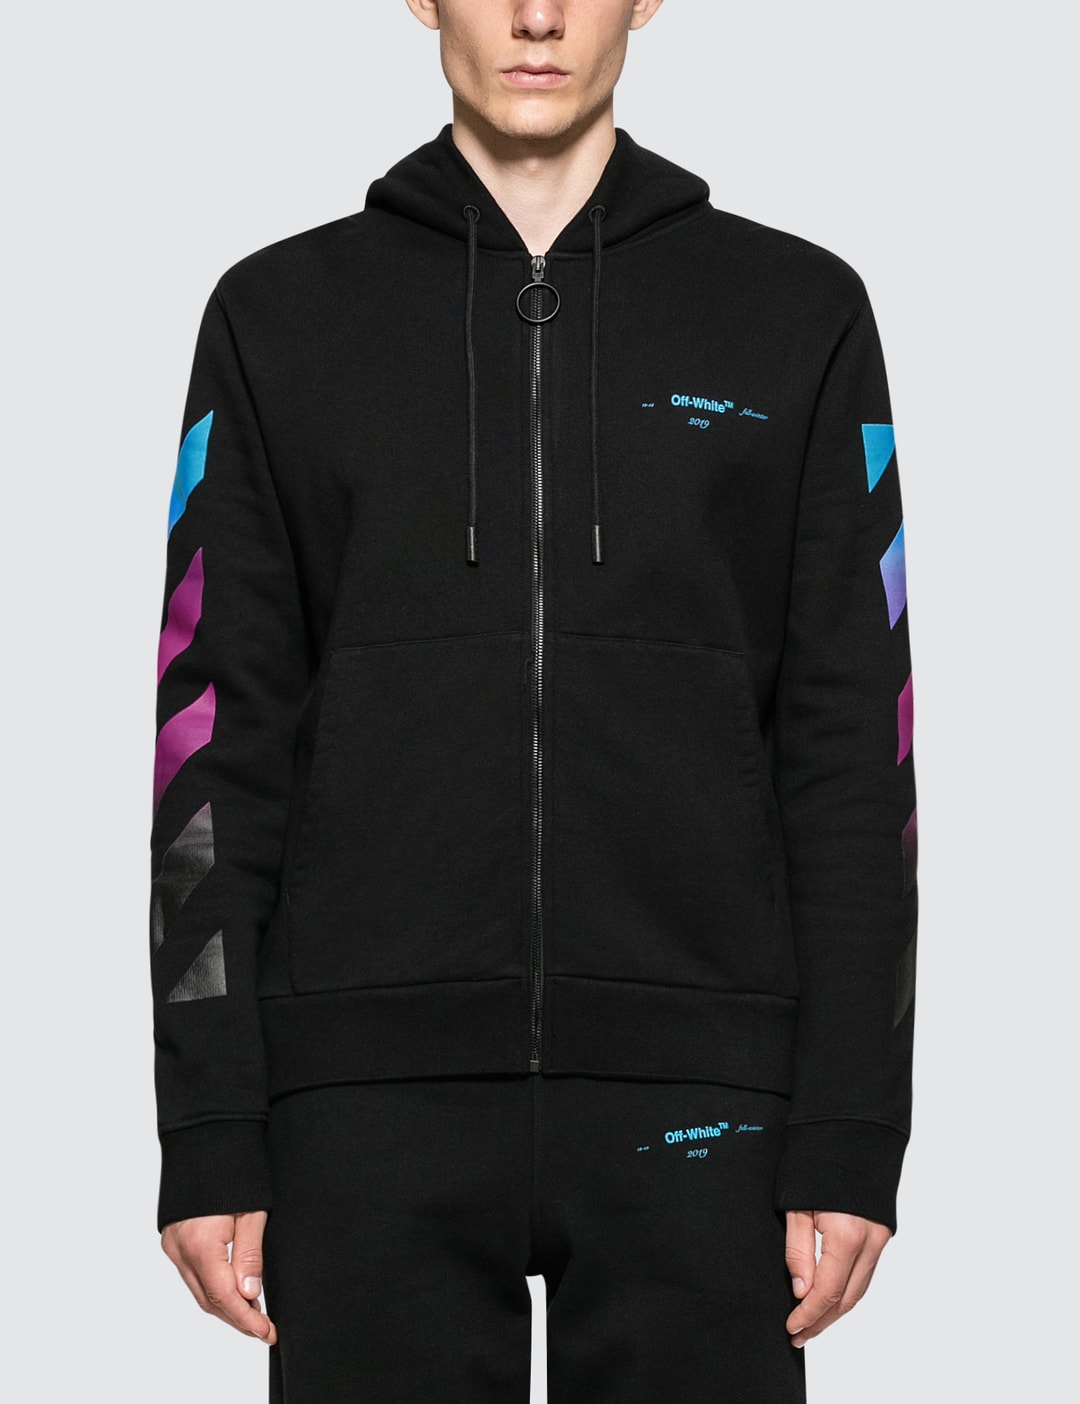 Off-White - Diag Gradient Zip Hoodie | HBX - Globally Curated Fashion and by Hypebeast